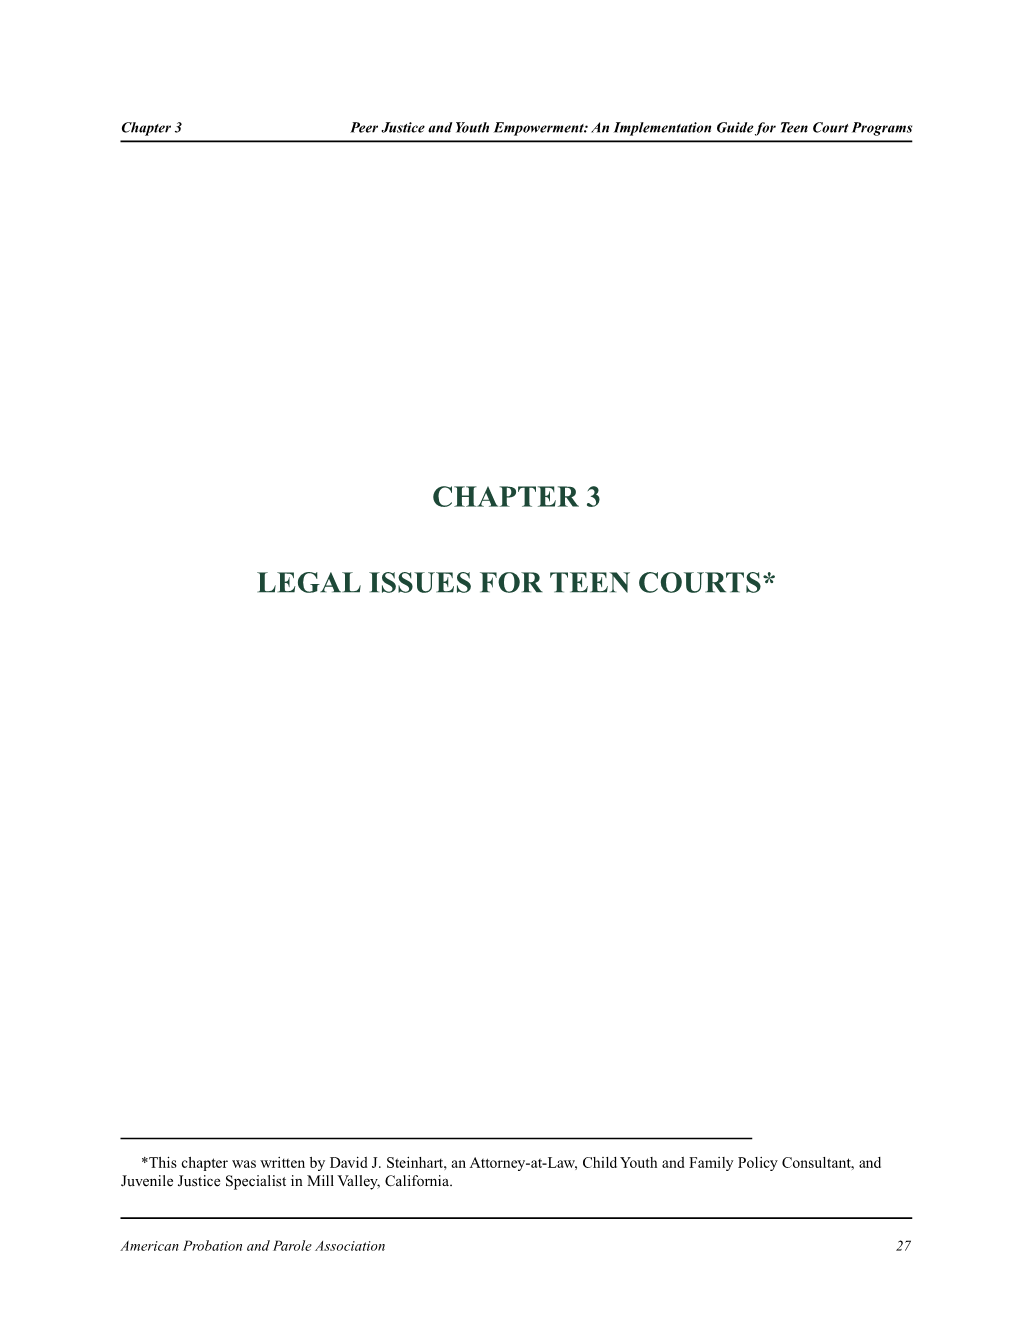 Chapter 3 Legal Issues for Teen Courts*